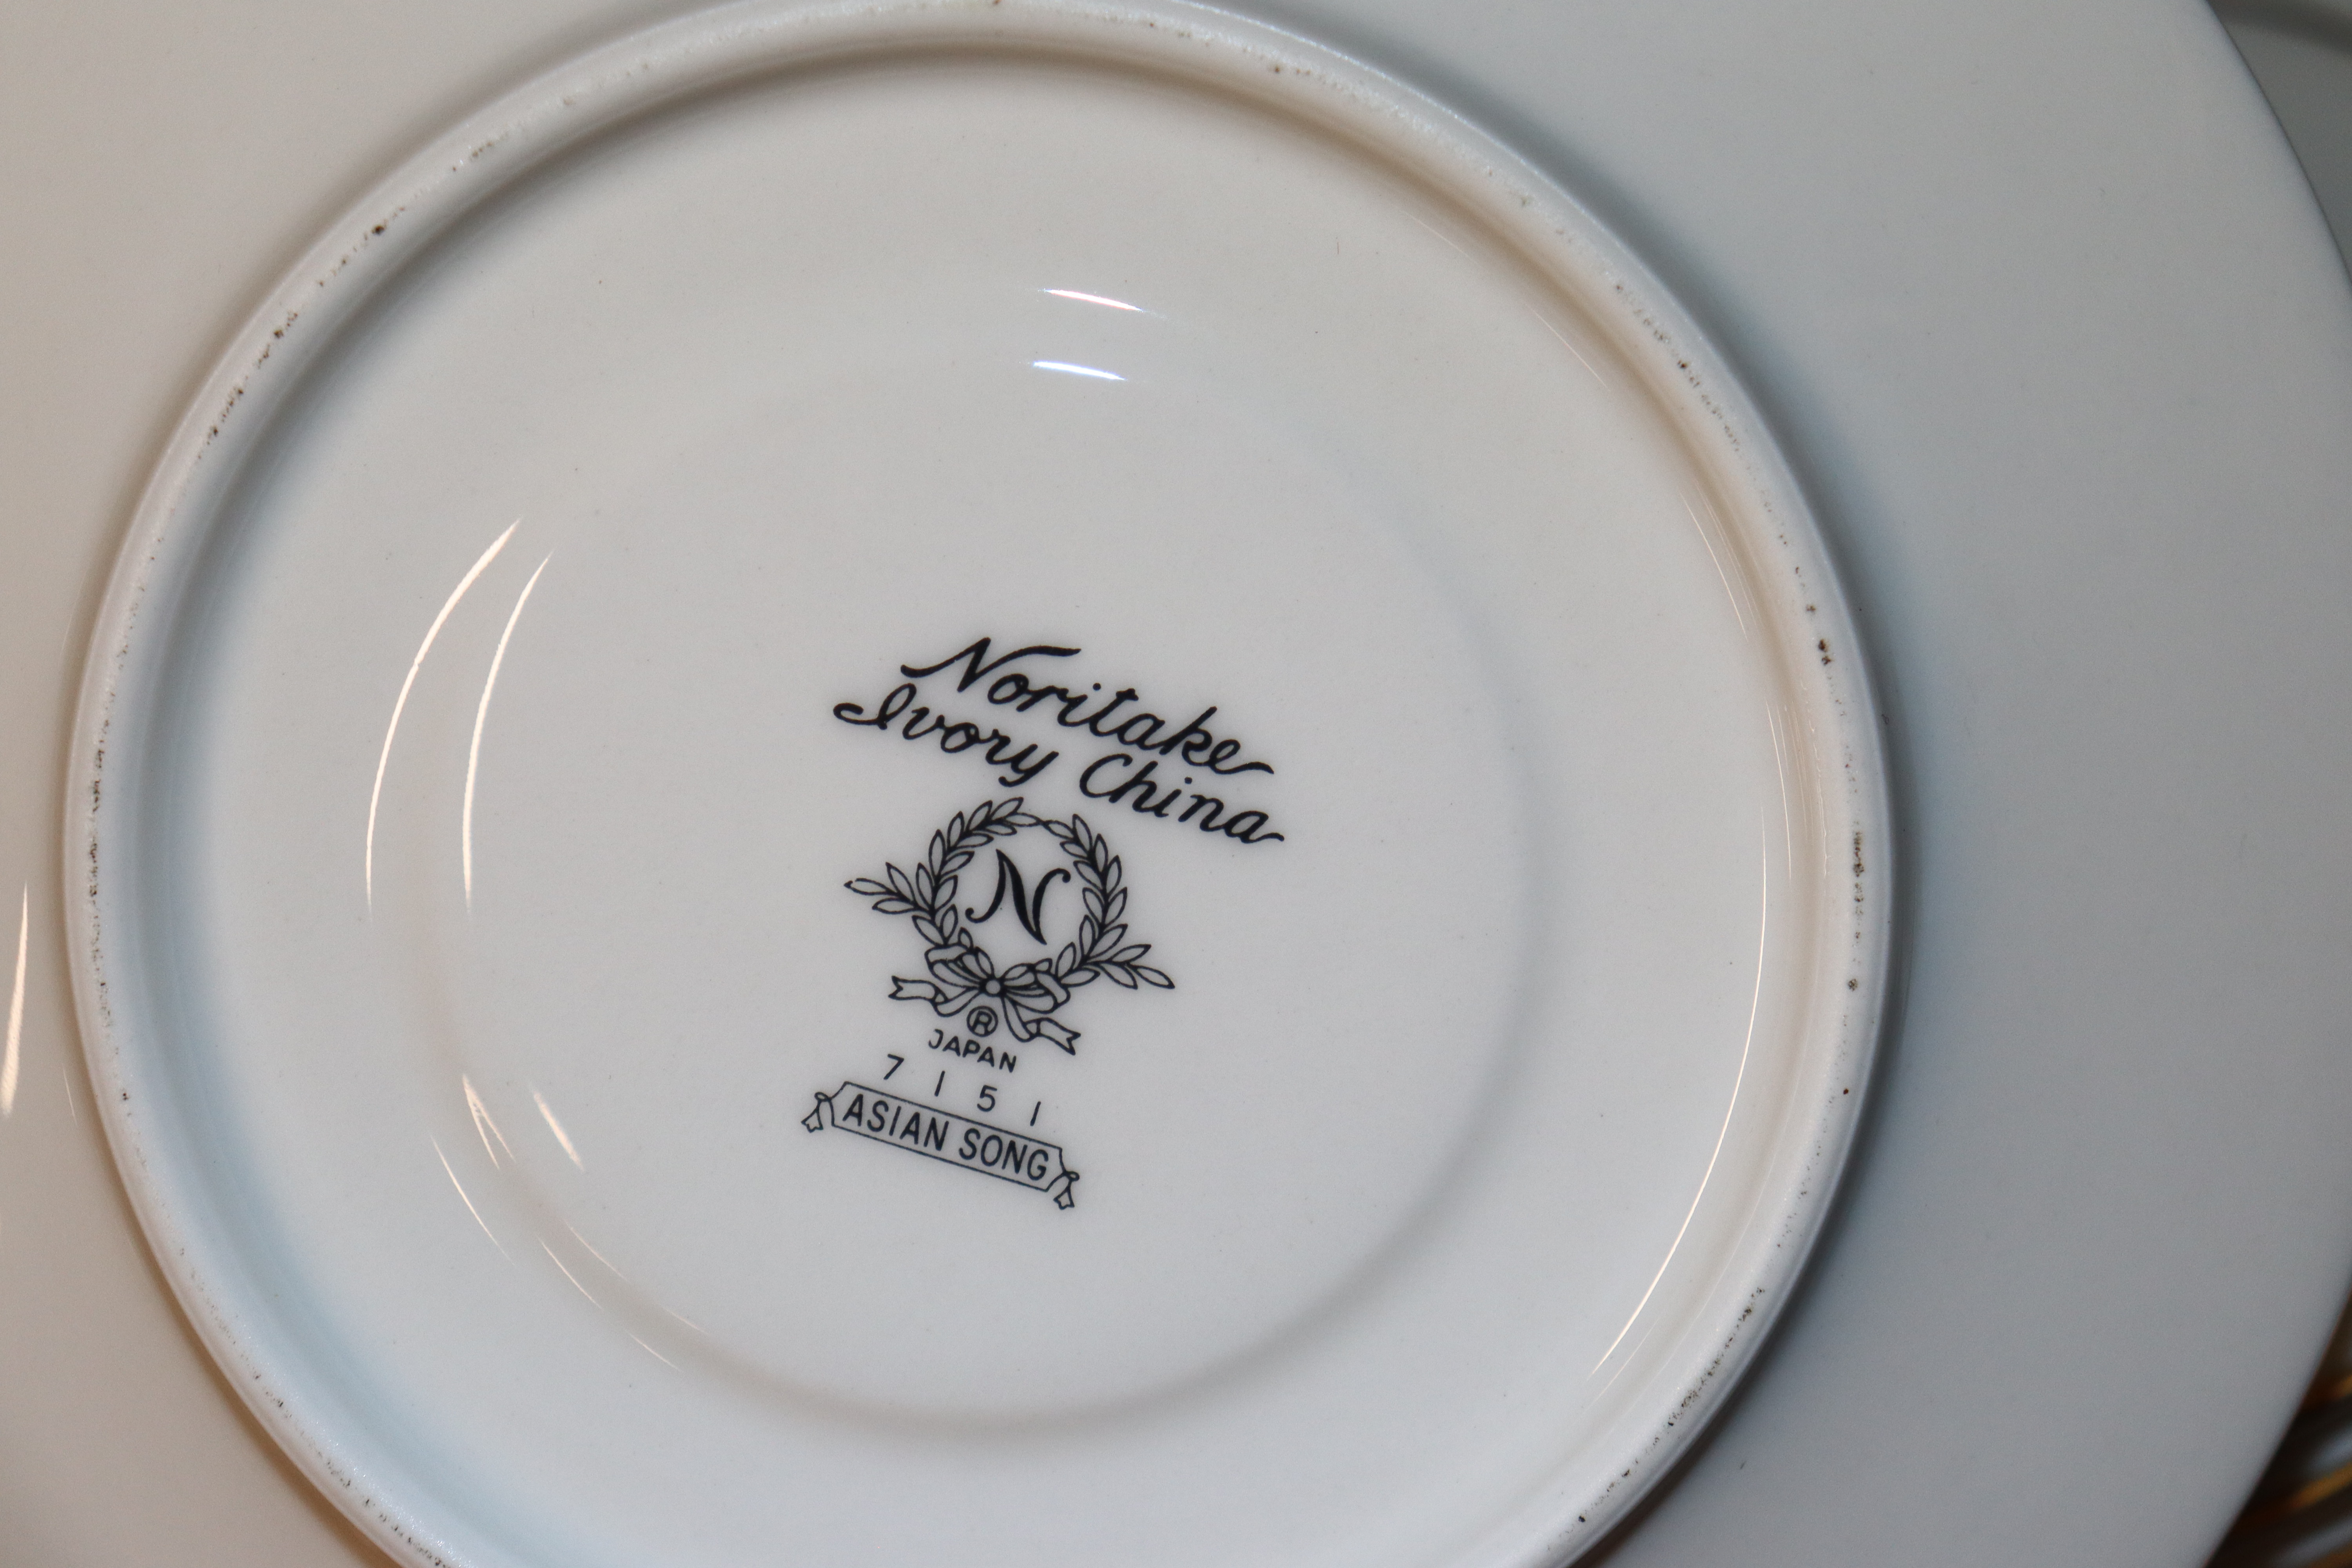 A Noritake "Asian Song" pattern dinner service - Image 2 of 2